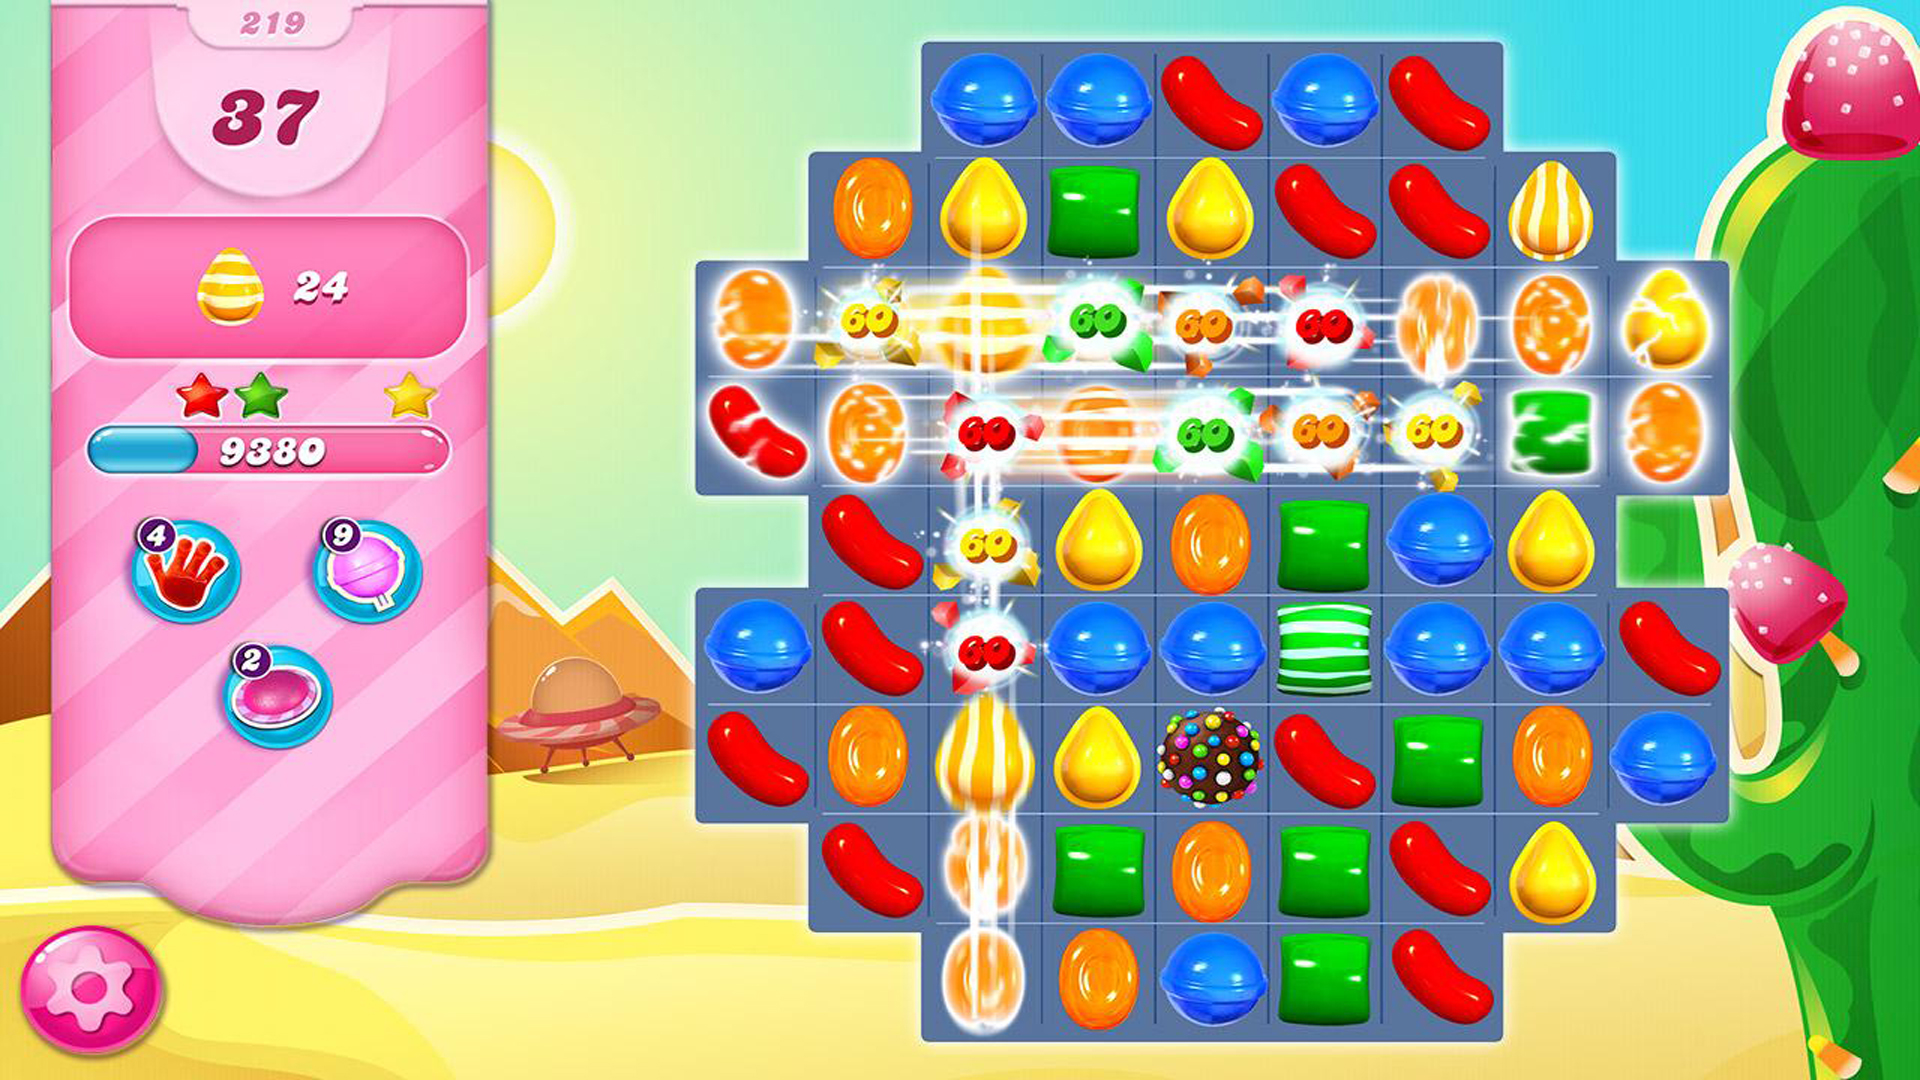 Candy Crush has many levels, each with its own challenges and objectives.